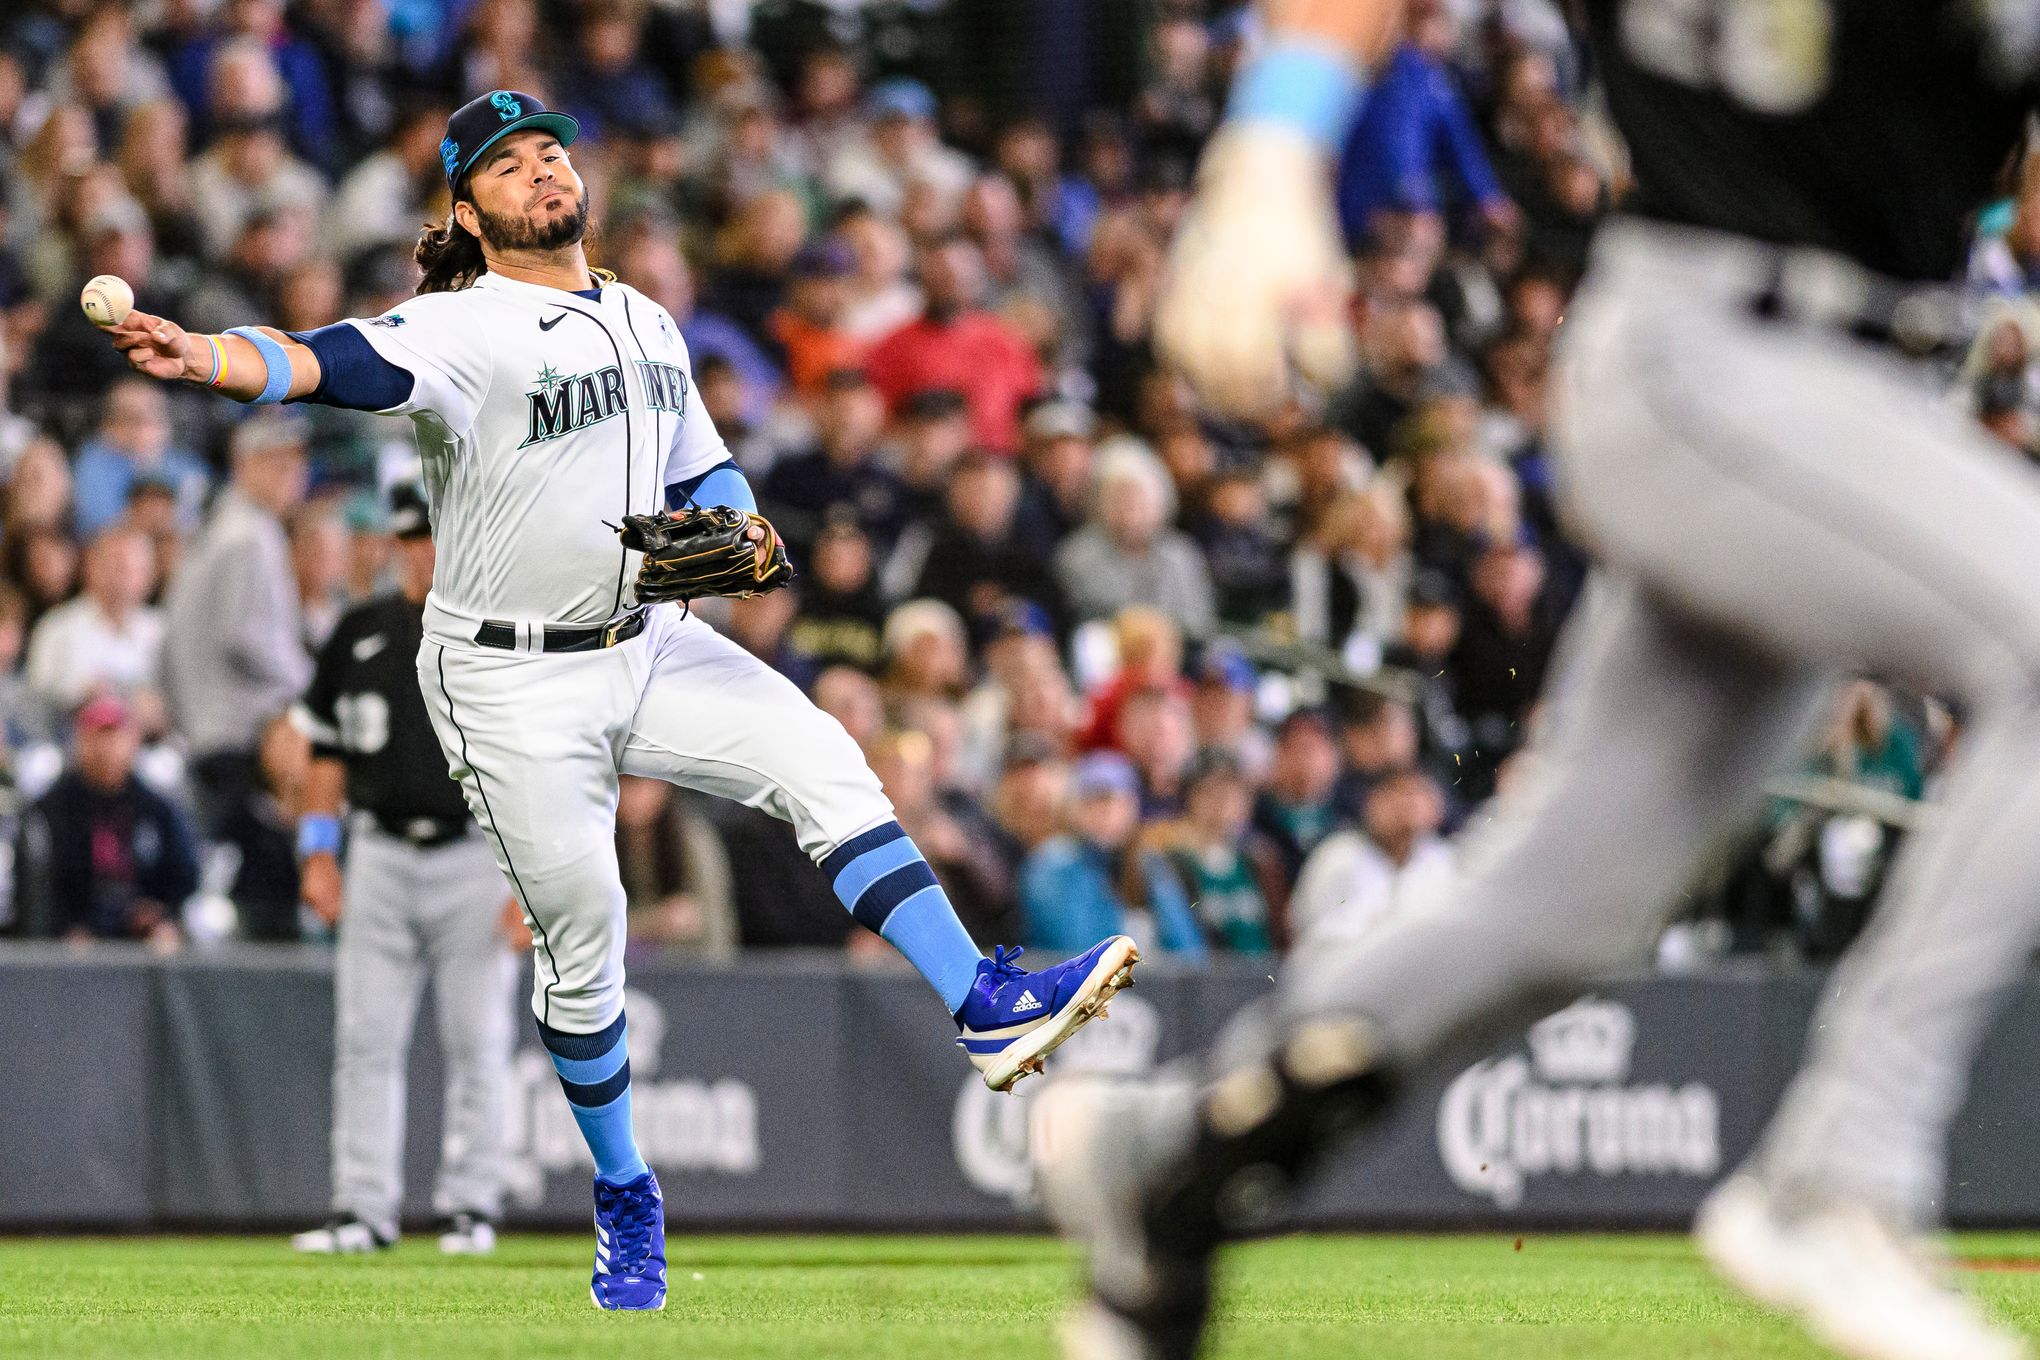 Mariners players, coaches ramp up campaign for Eugenio Suarez to